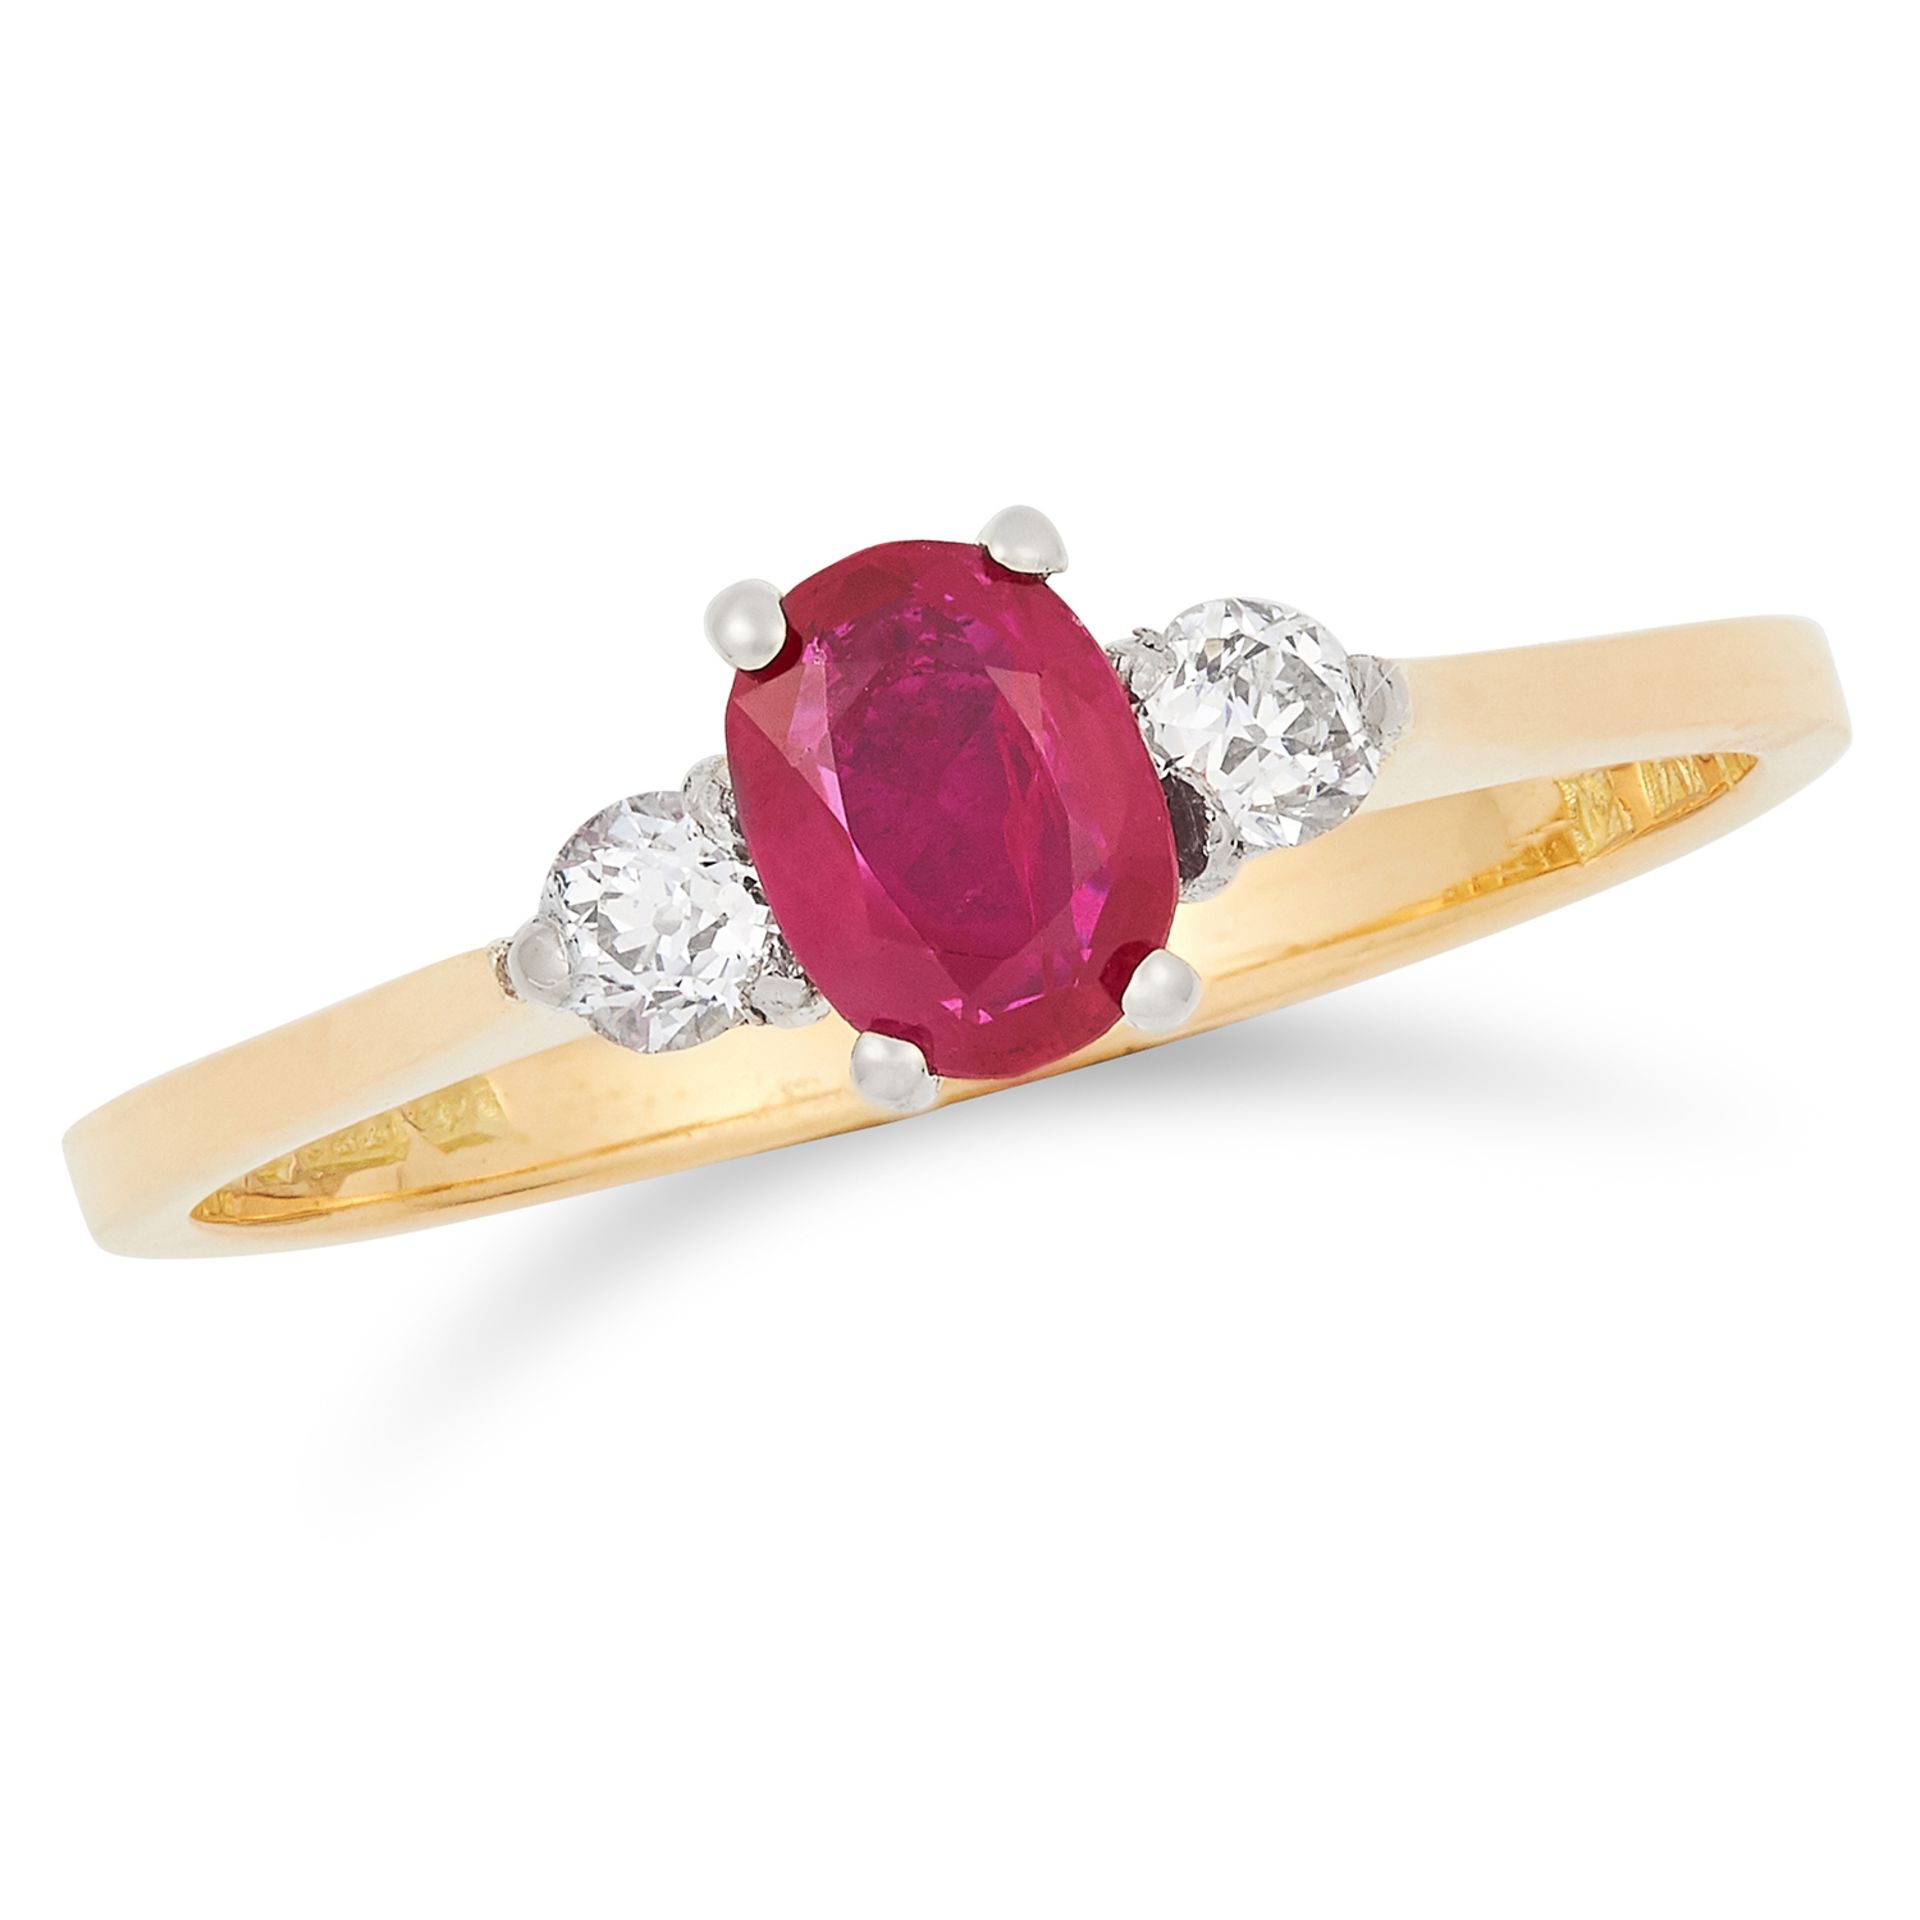 RUBY AND DIAMOND RING set with an oval cut ruby between two round cut diamonds, size L / 6, 2g.